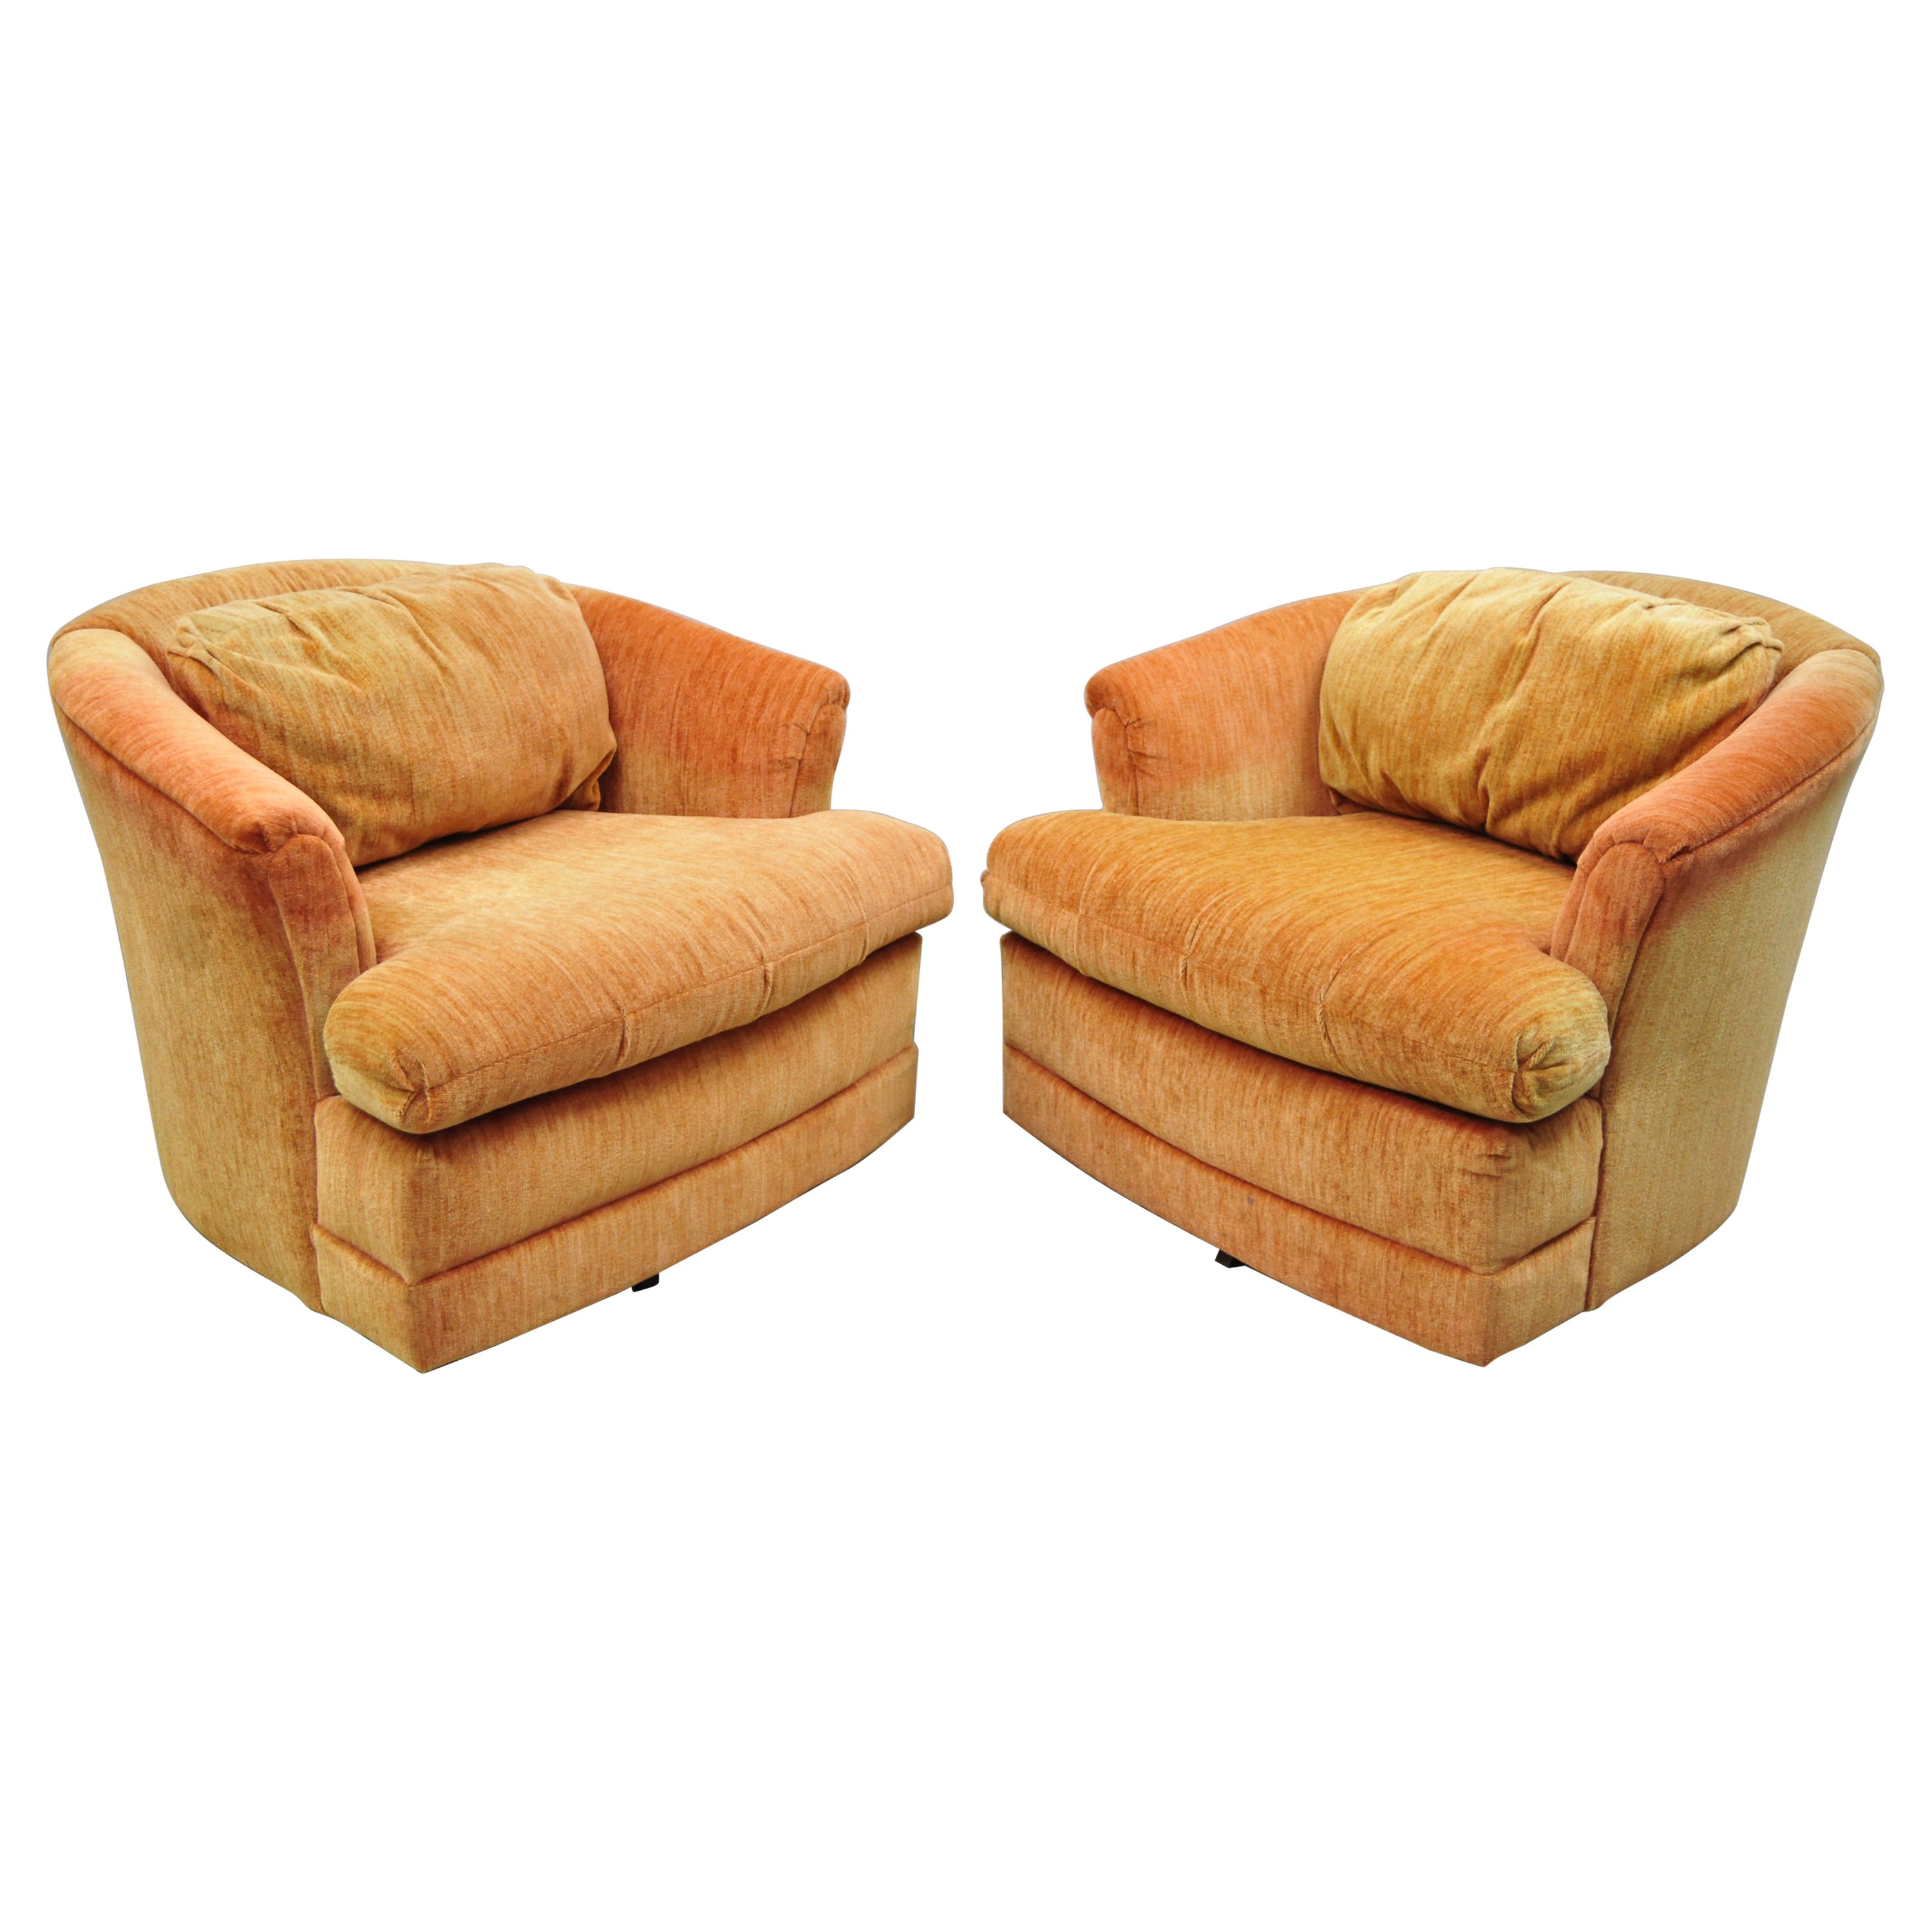 Flexsteel Mid Century Orange Upholstered Swivel Lounge Club Chairs, a Pair For Sale